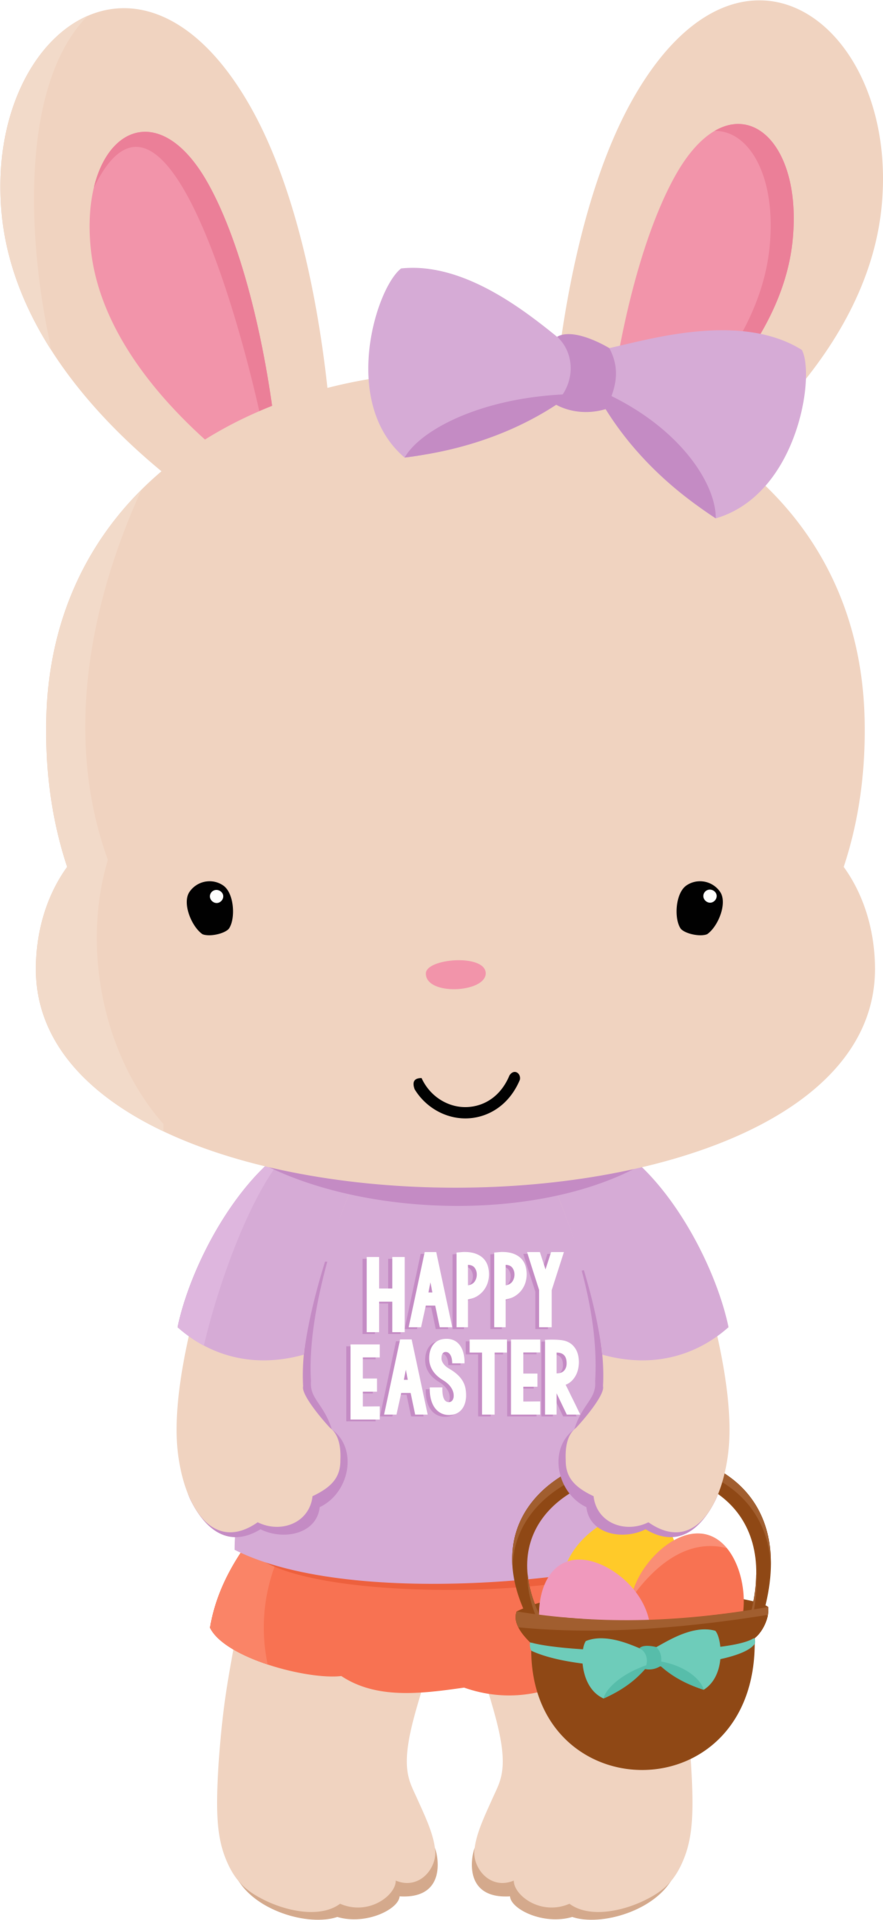 Easter clipart shirt.  shared view all